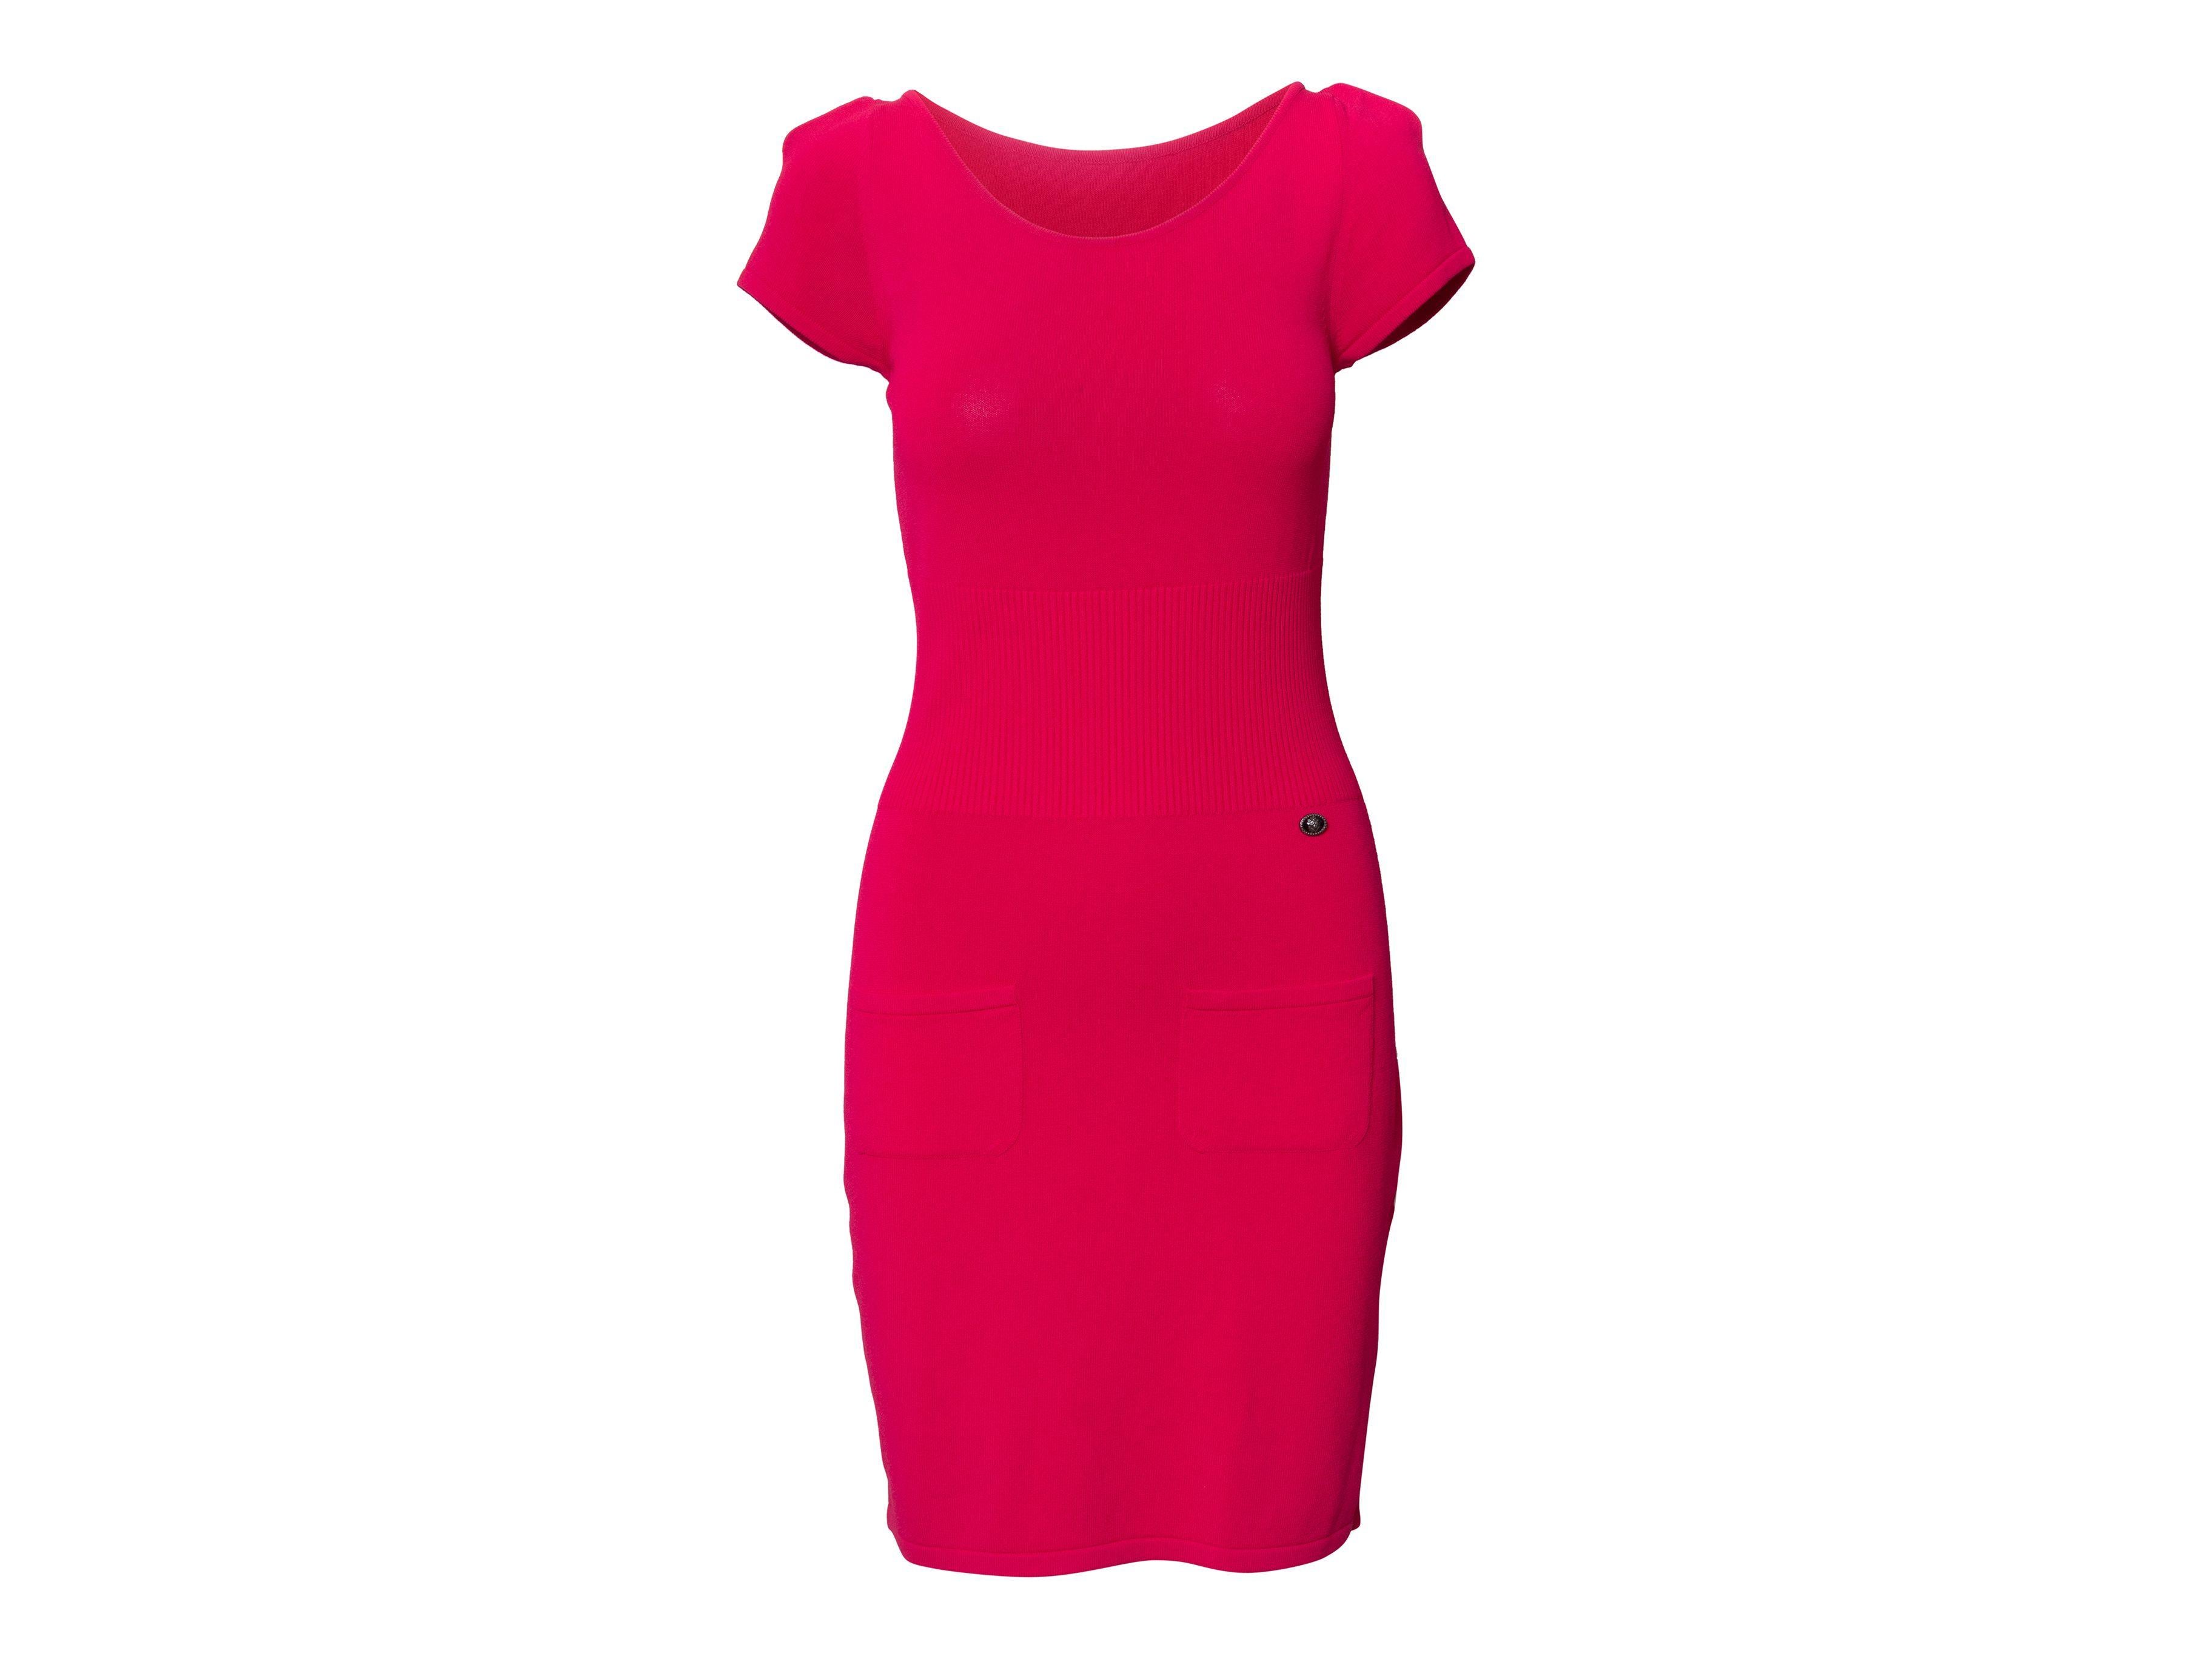 Product Details: Hot pink knit cap sleeve mini dress by Chanel. Round neckline. Dual pocket details at front. 28